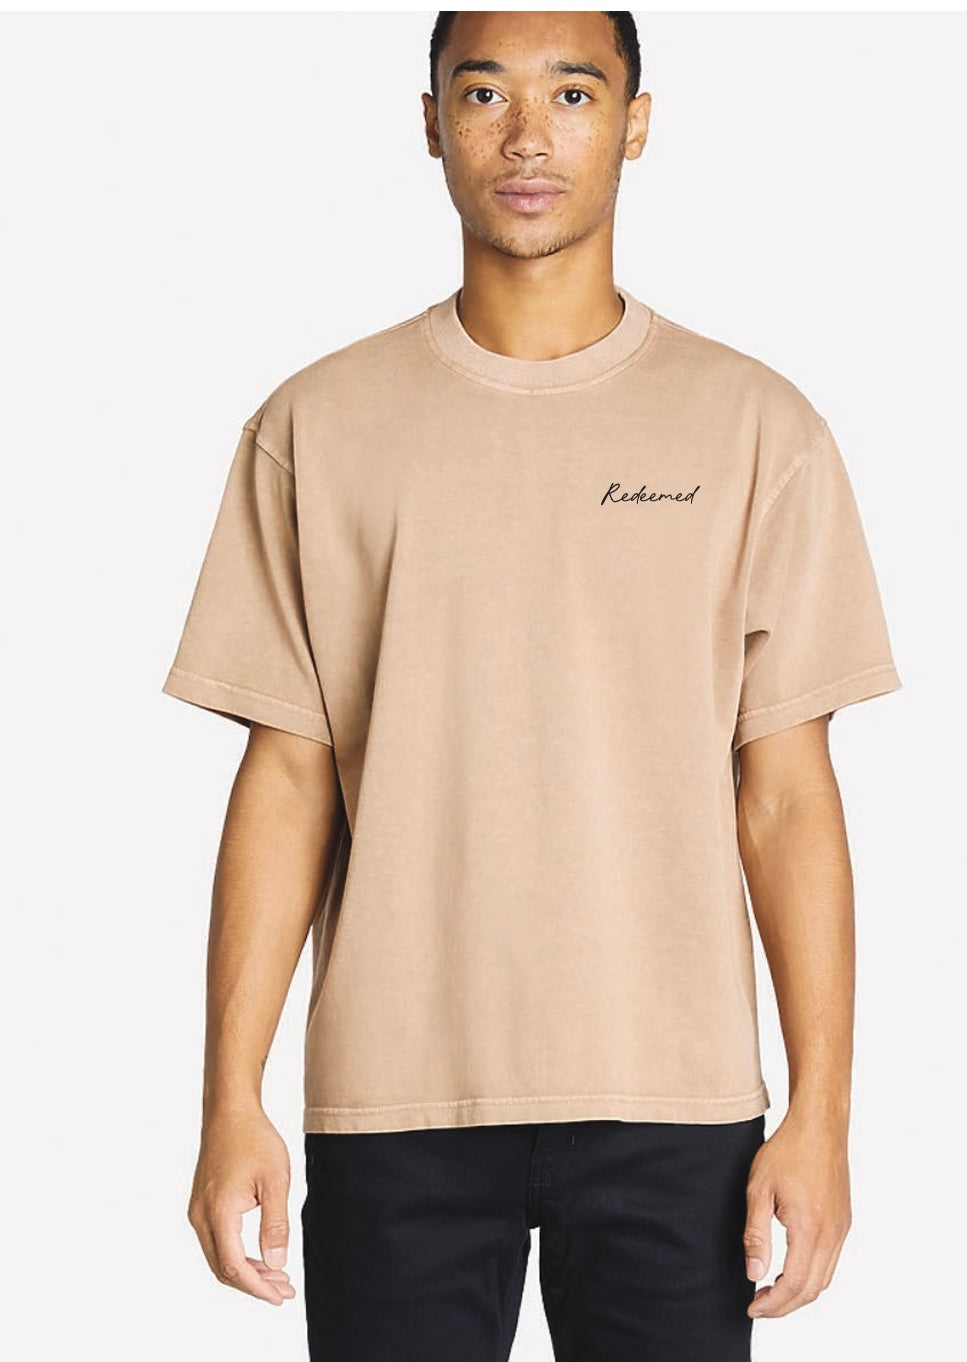 Redeemed-Tan Embroidered T-shirt